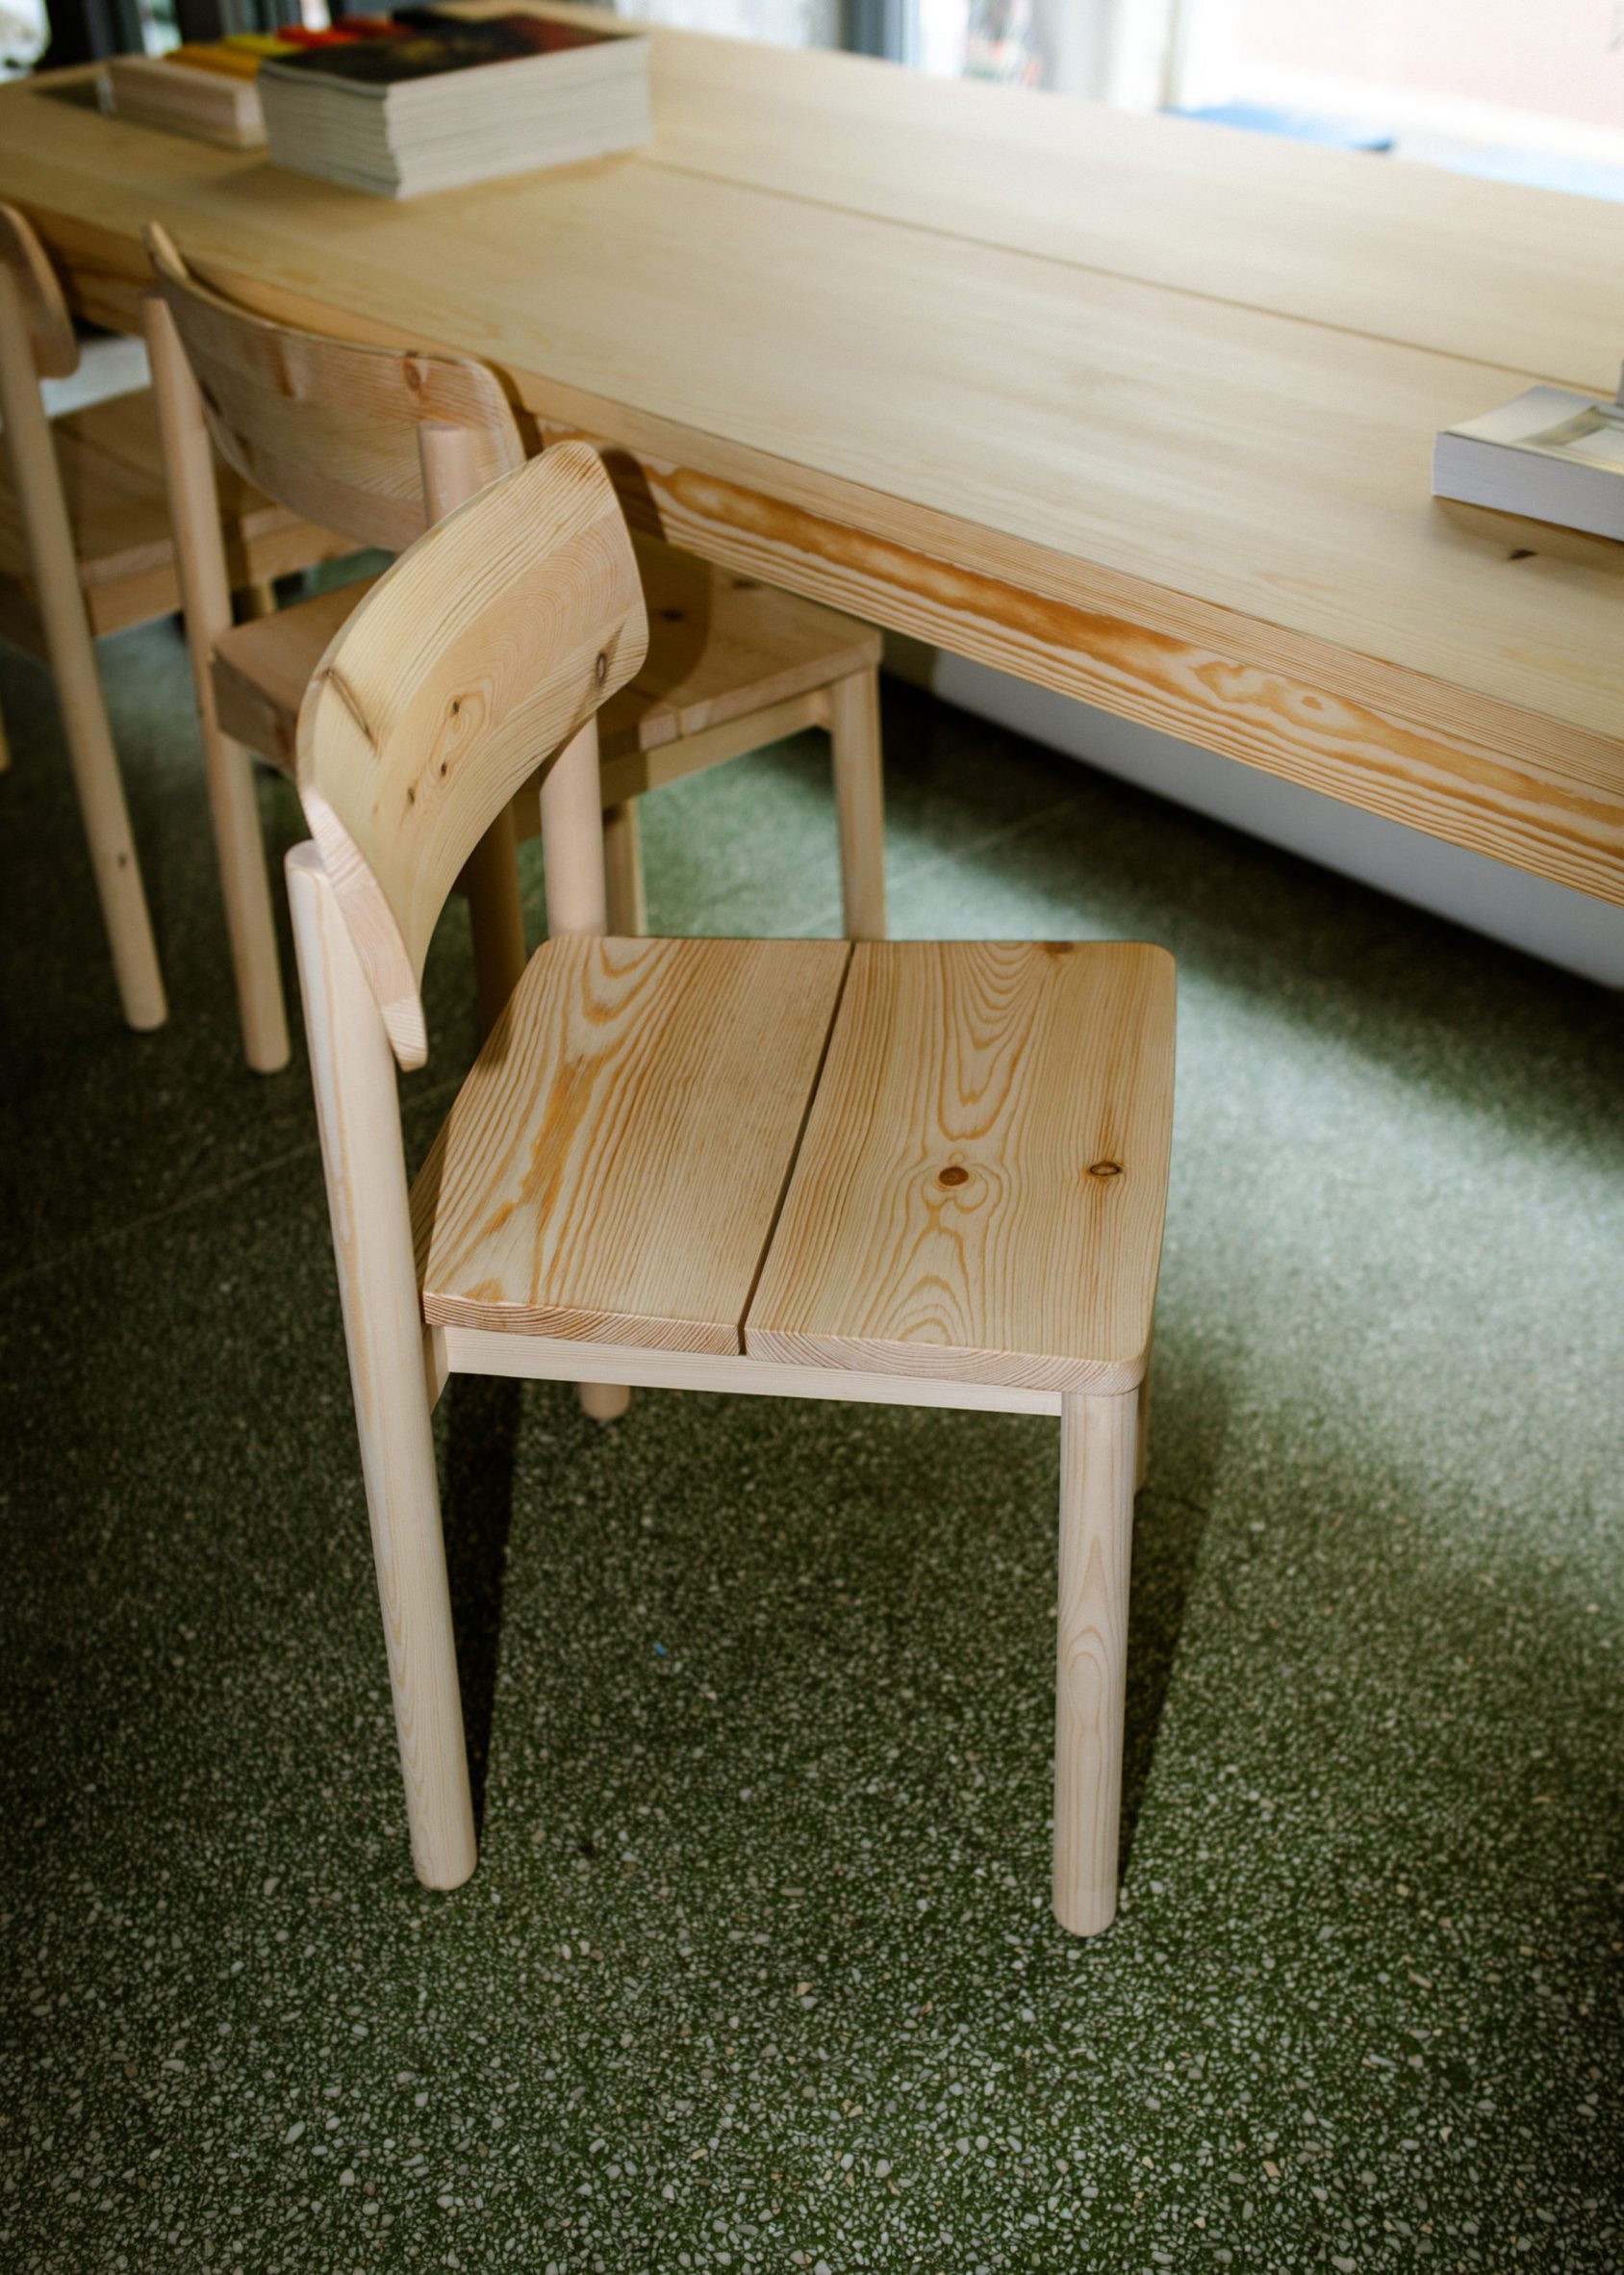 Minus Chair and Table with natural wood finish at exhibition in Oslo for Designers' Saturday